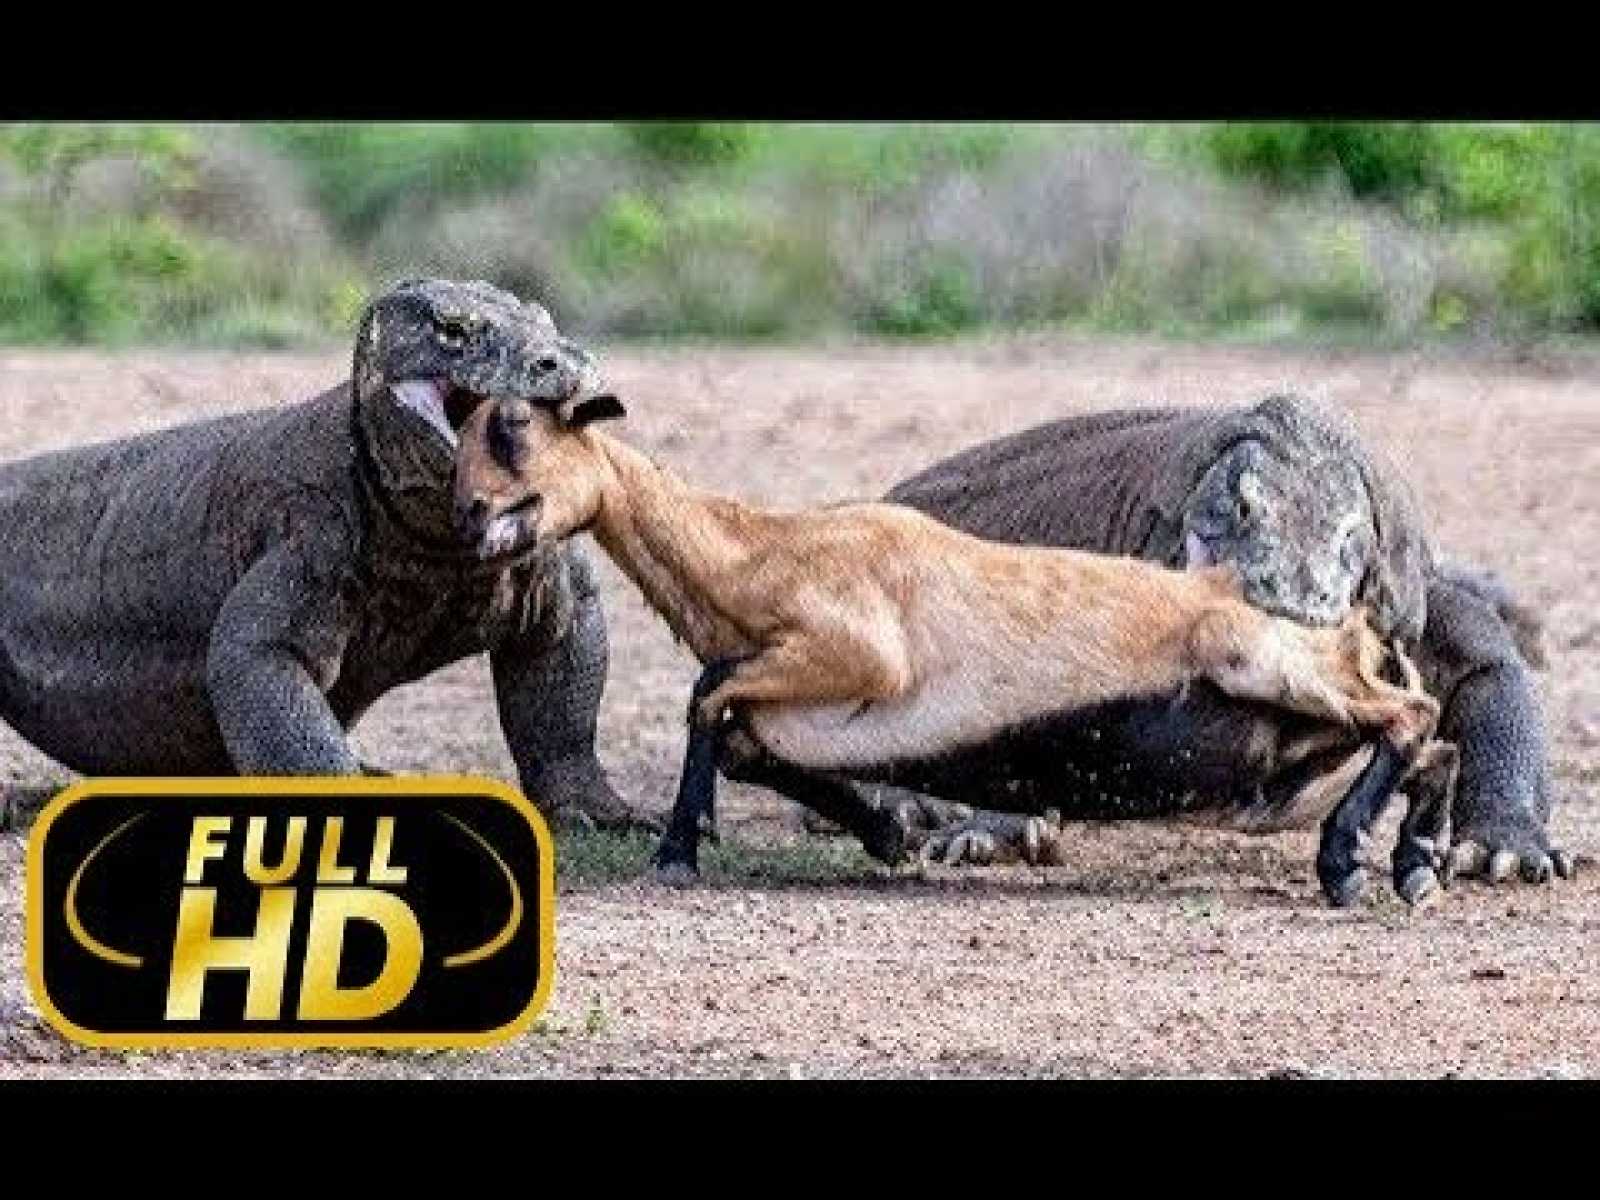 THE MOST DANGEROUS ANIMALS. ASIA / FULL HD - Documentary Film on Amazing  Animals TV